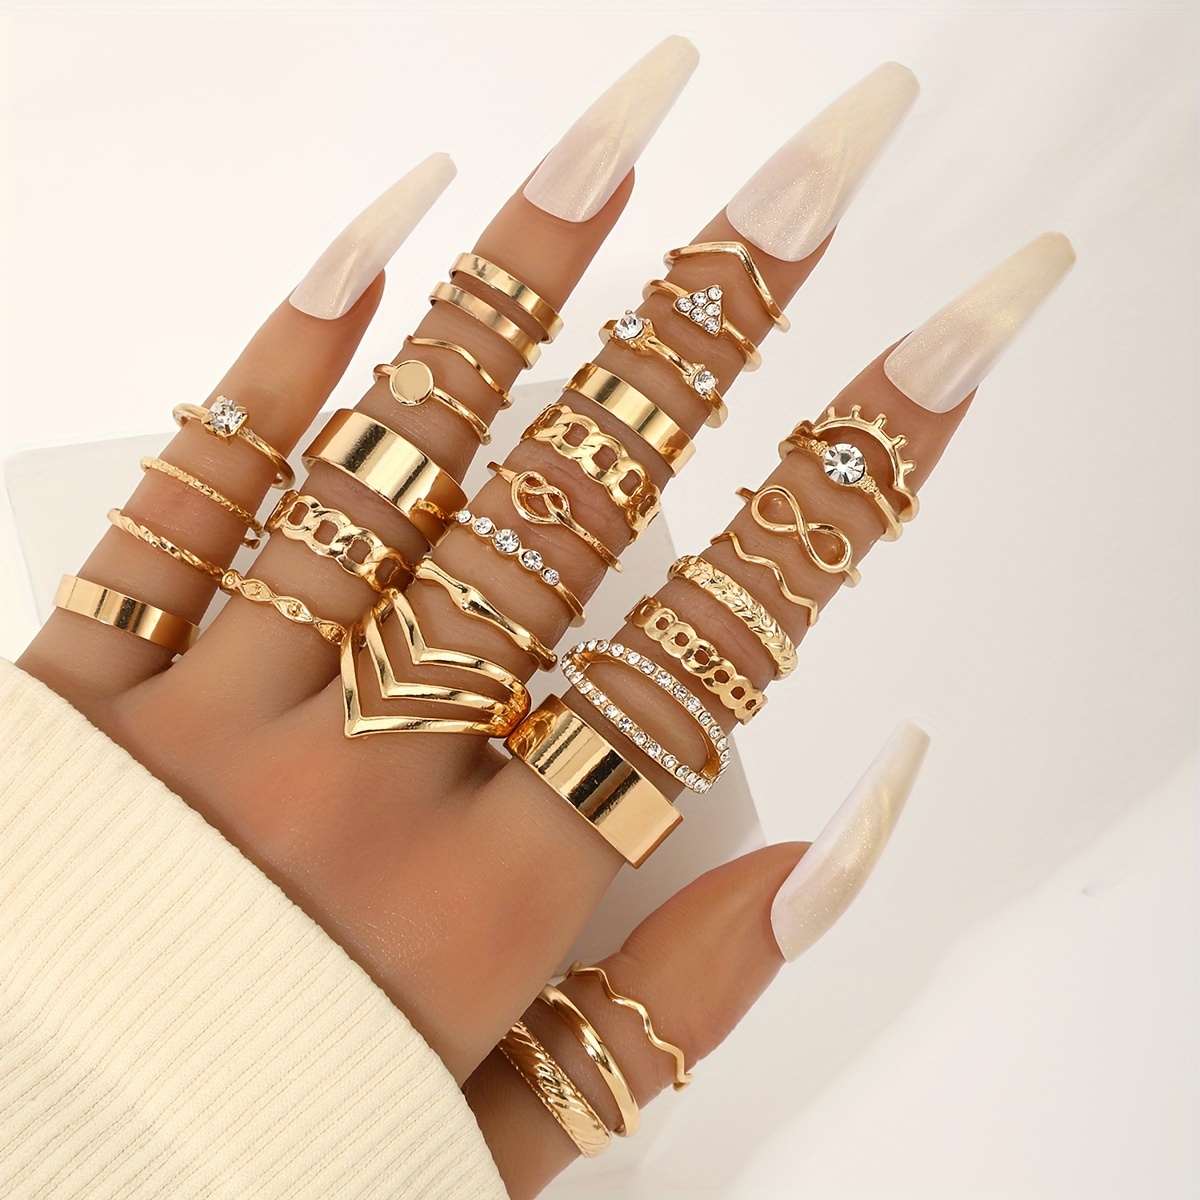 

30pcs/set Elegant Stackable Rings Set With Shiny Rhinestone Inlaid, Fashion Infinity Knot Design, Vacation Style Perfect Stylish Daily Party Jewelry Accessory For Women